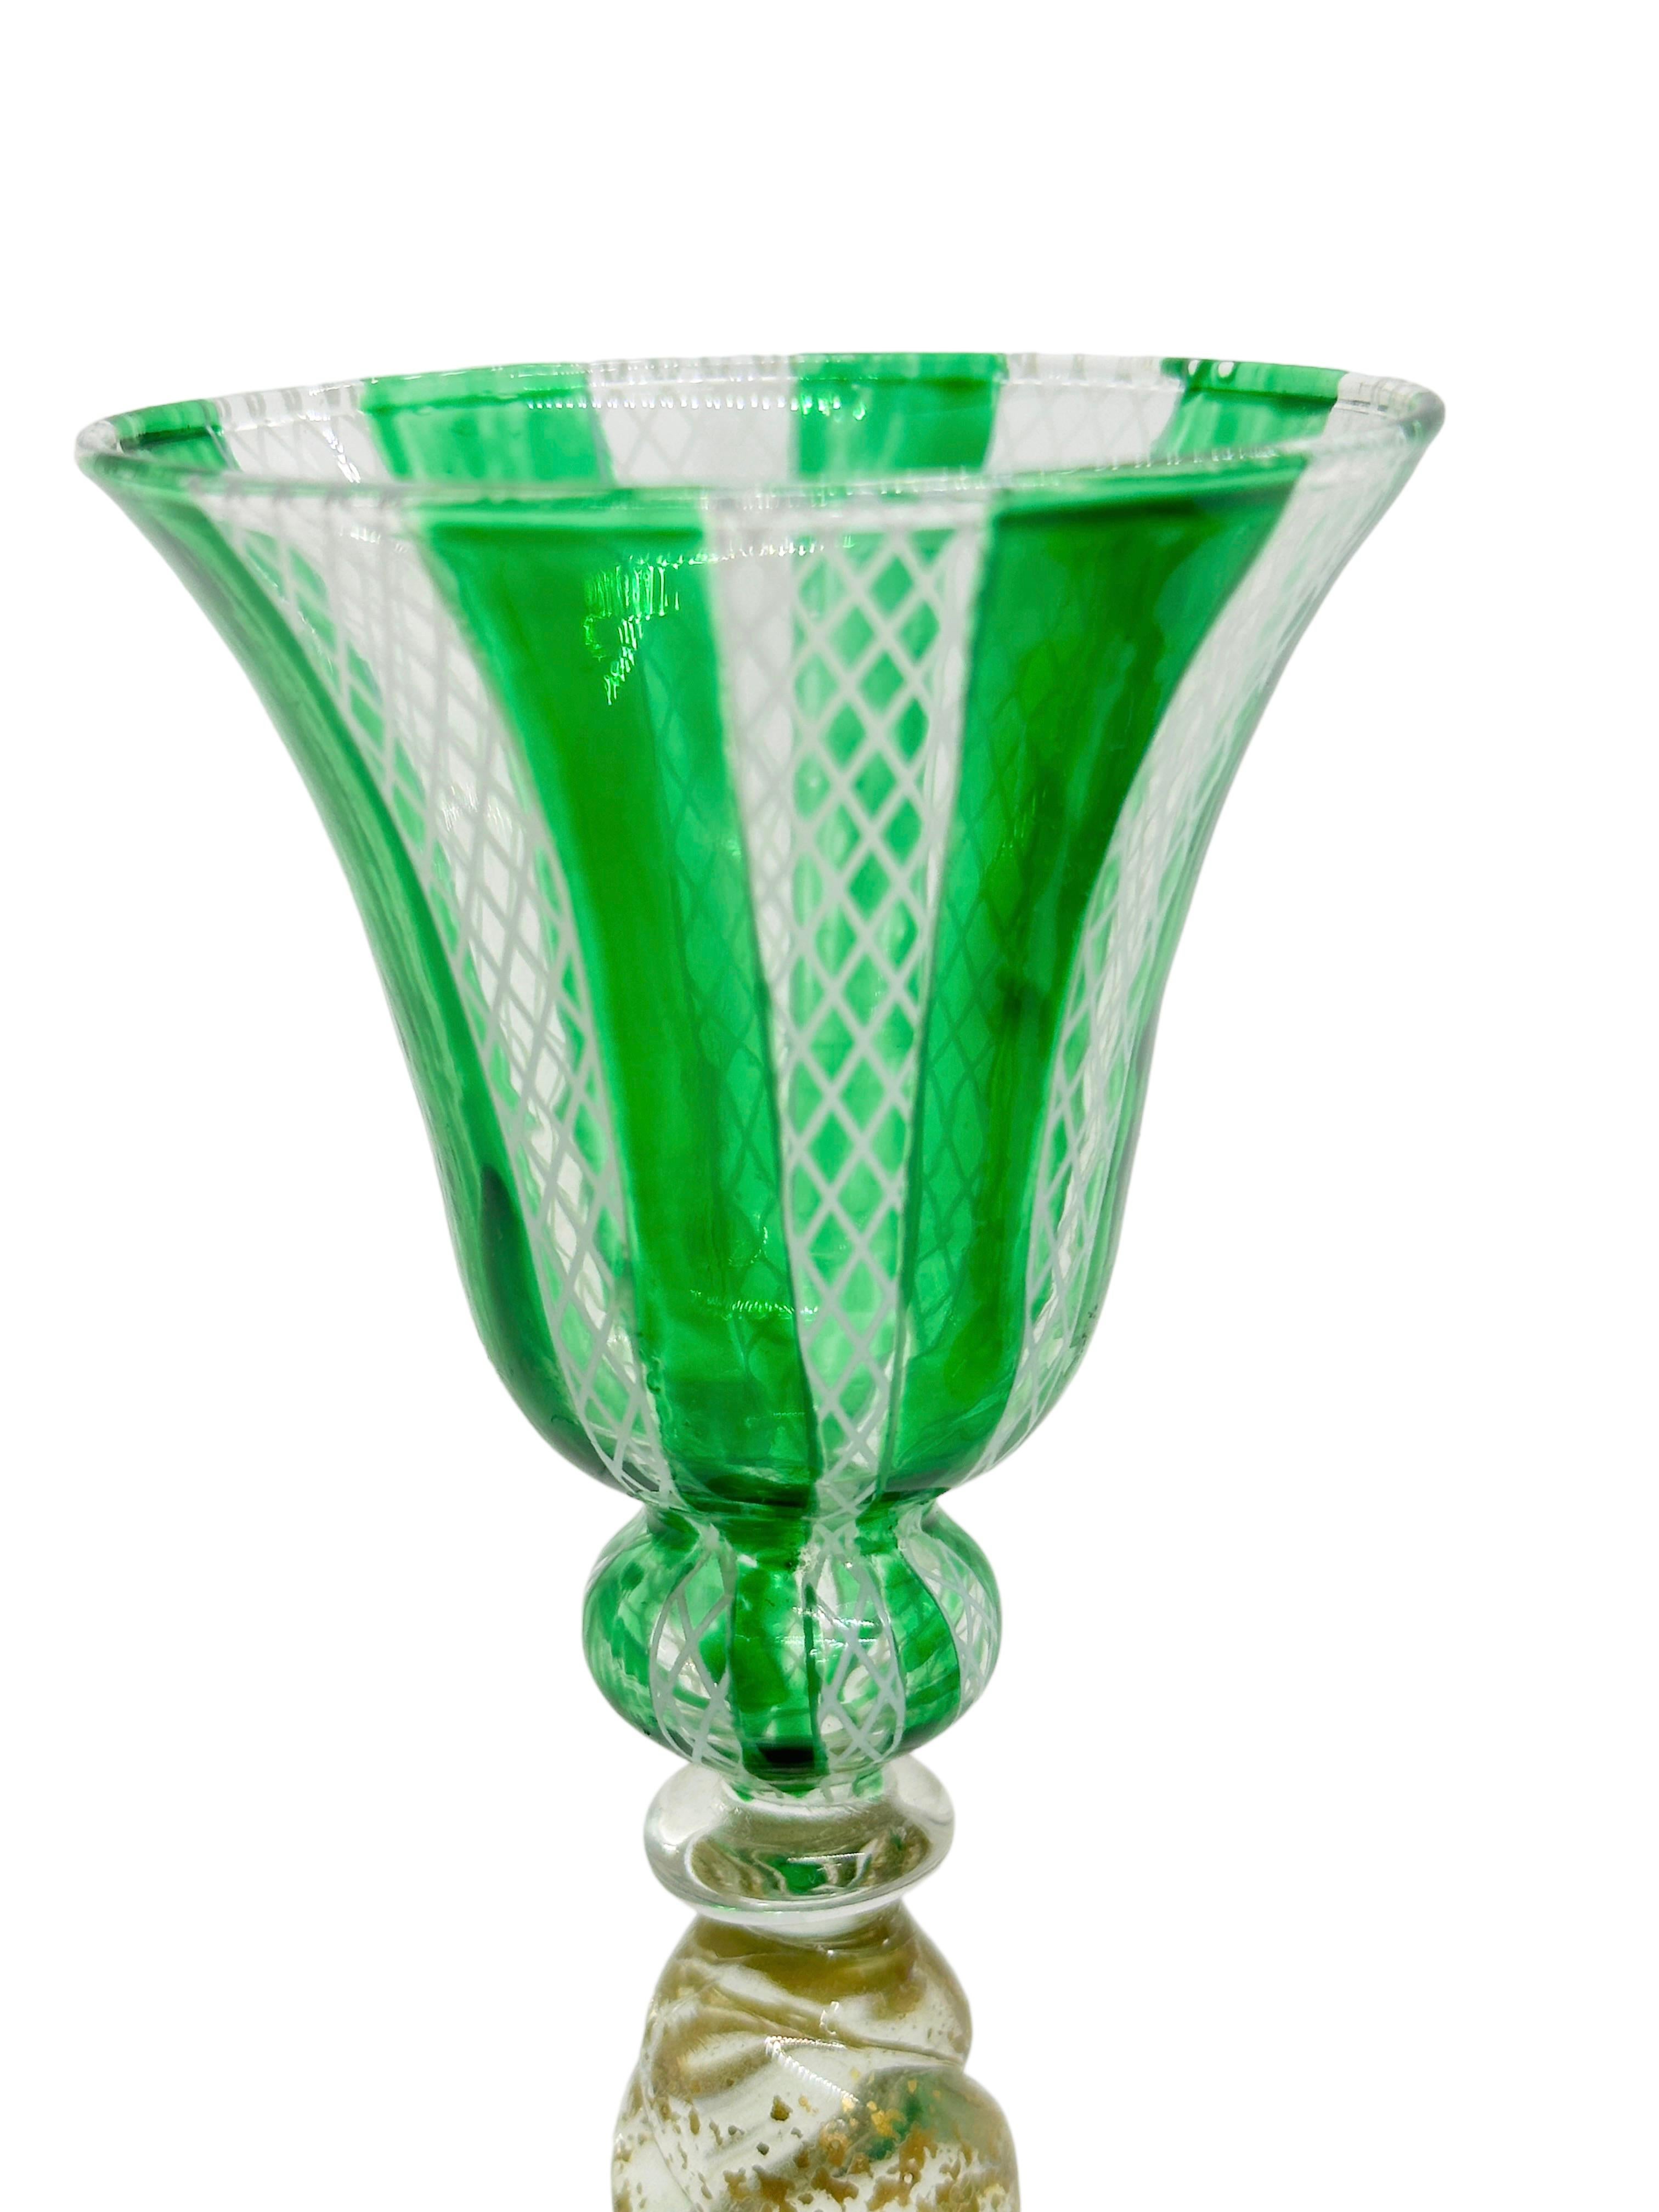 Green & Gold Stardust Salviati Murano Glass Liqueur Goblet, Vintage Italy  For Sale 2